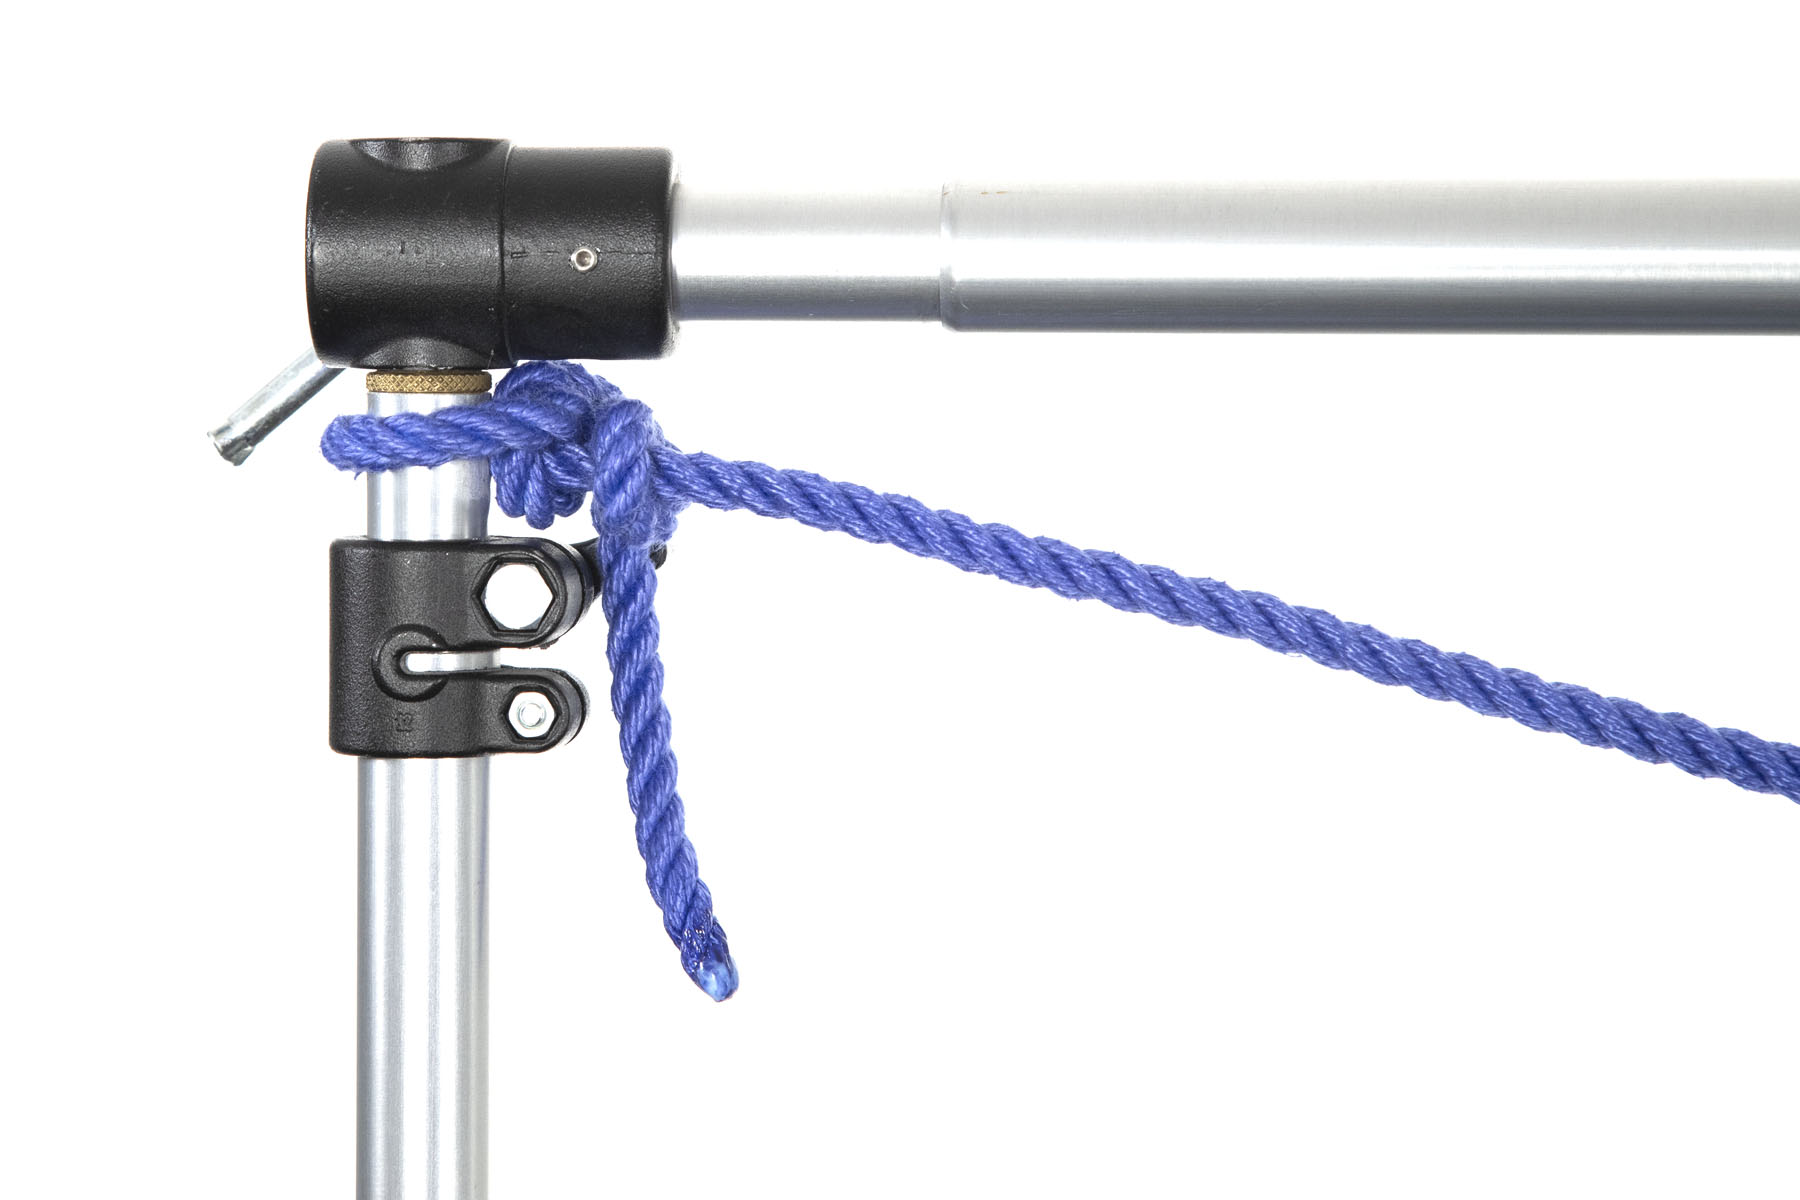 Two one inch diameter aluminum pipes meet at a ninety degree angle. One exits the frame to the right and the other exits the frame at the bottom. A single length of blue rope is tied to the vertical pipe with two half hitches.